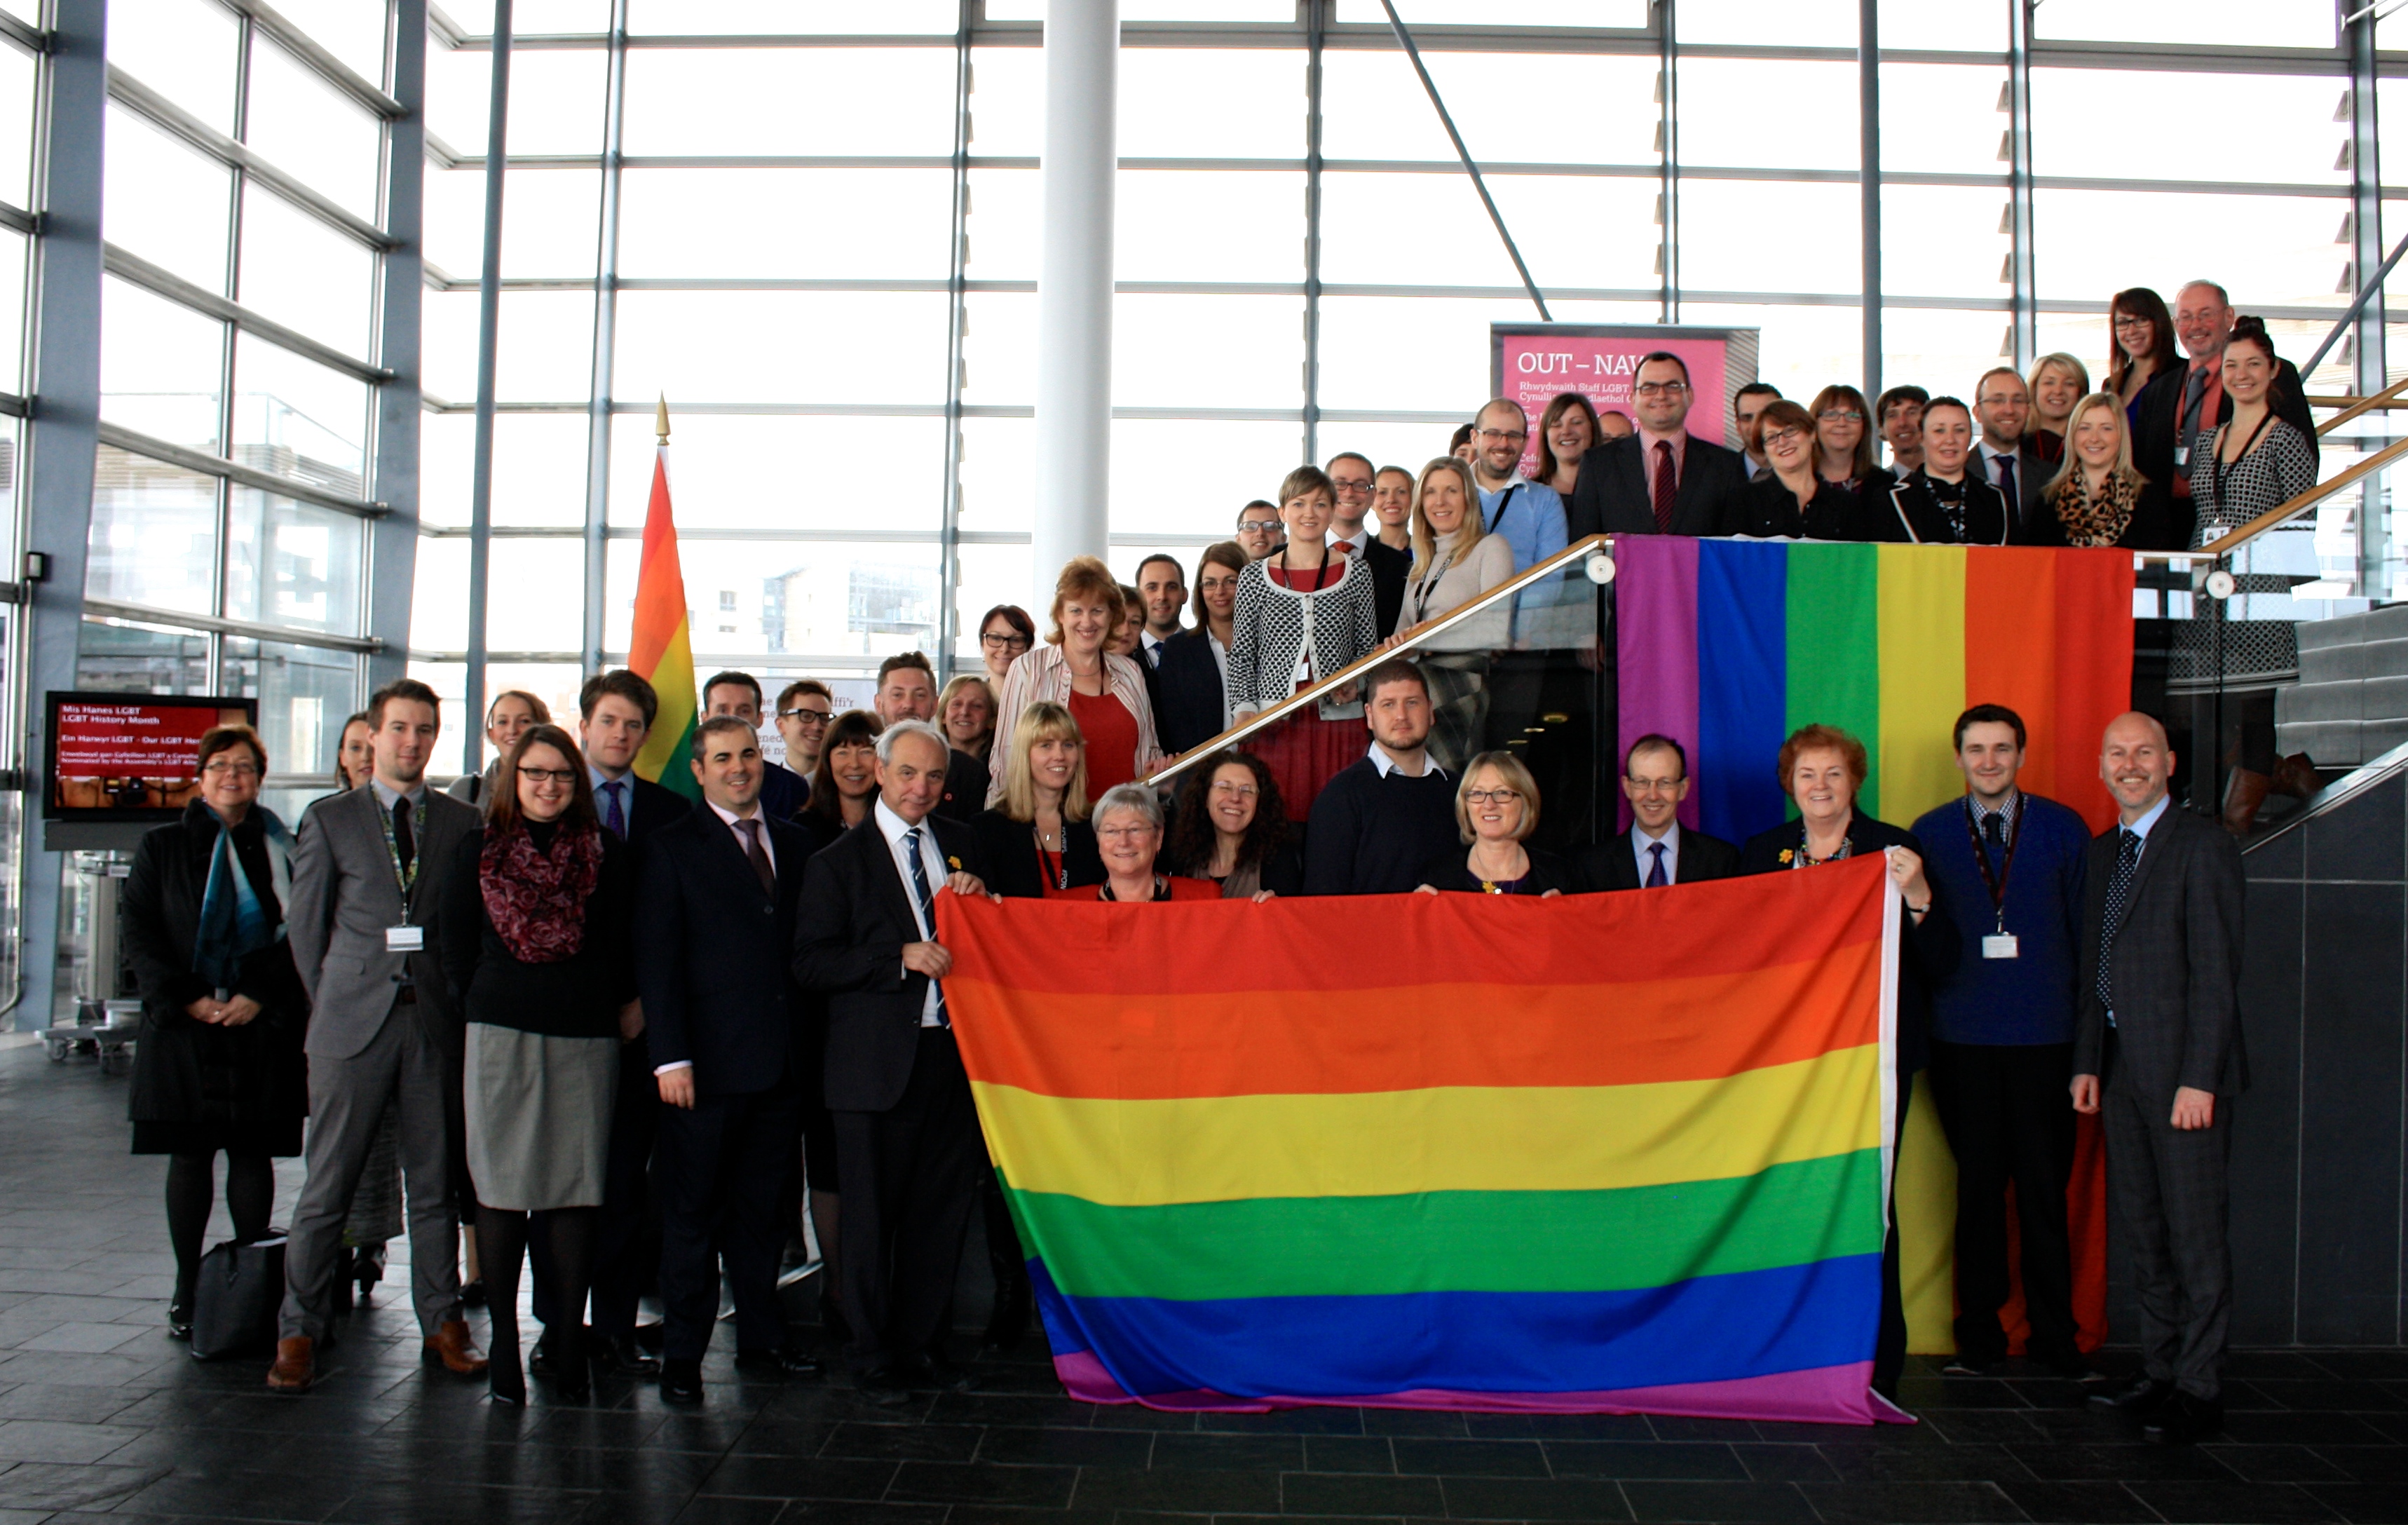 LGBT History Month Photocall